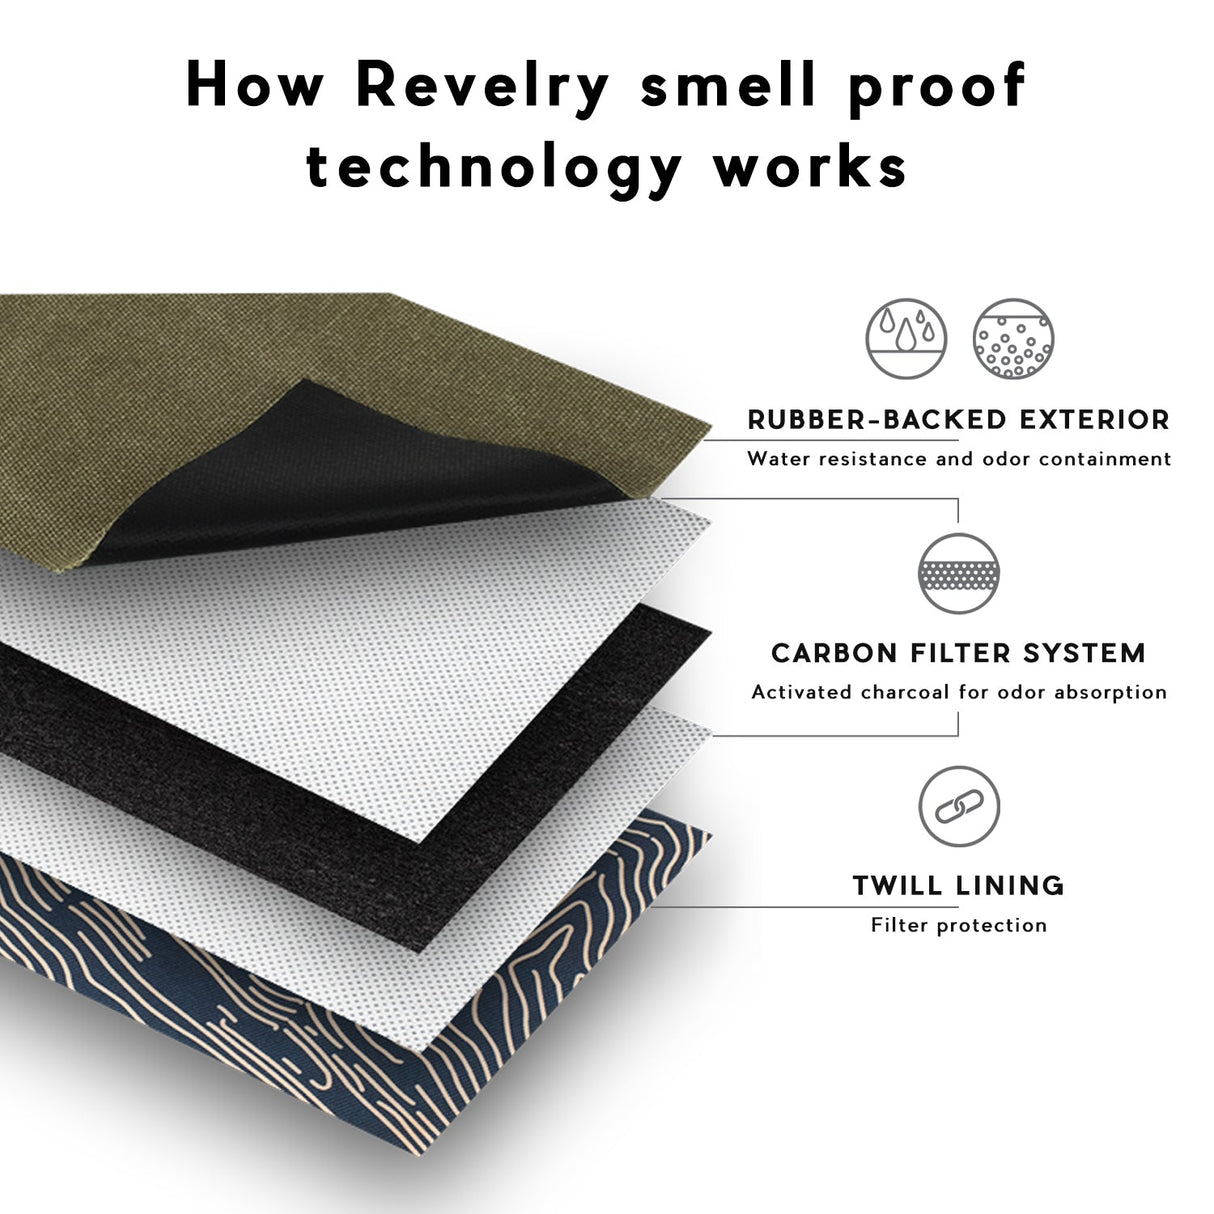 Revelry Supply Rolling Kit with Smell Proof Technology layers diagram